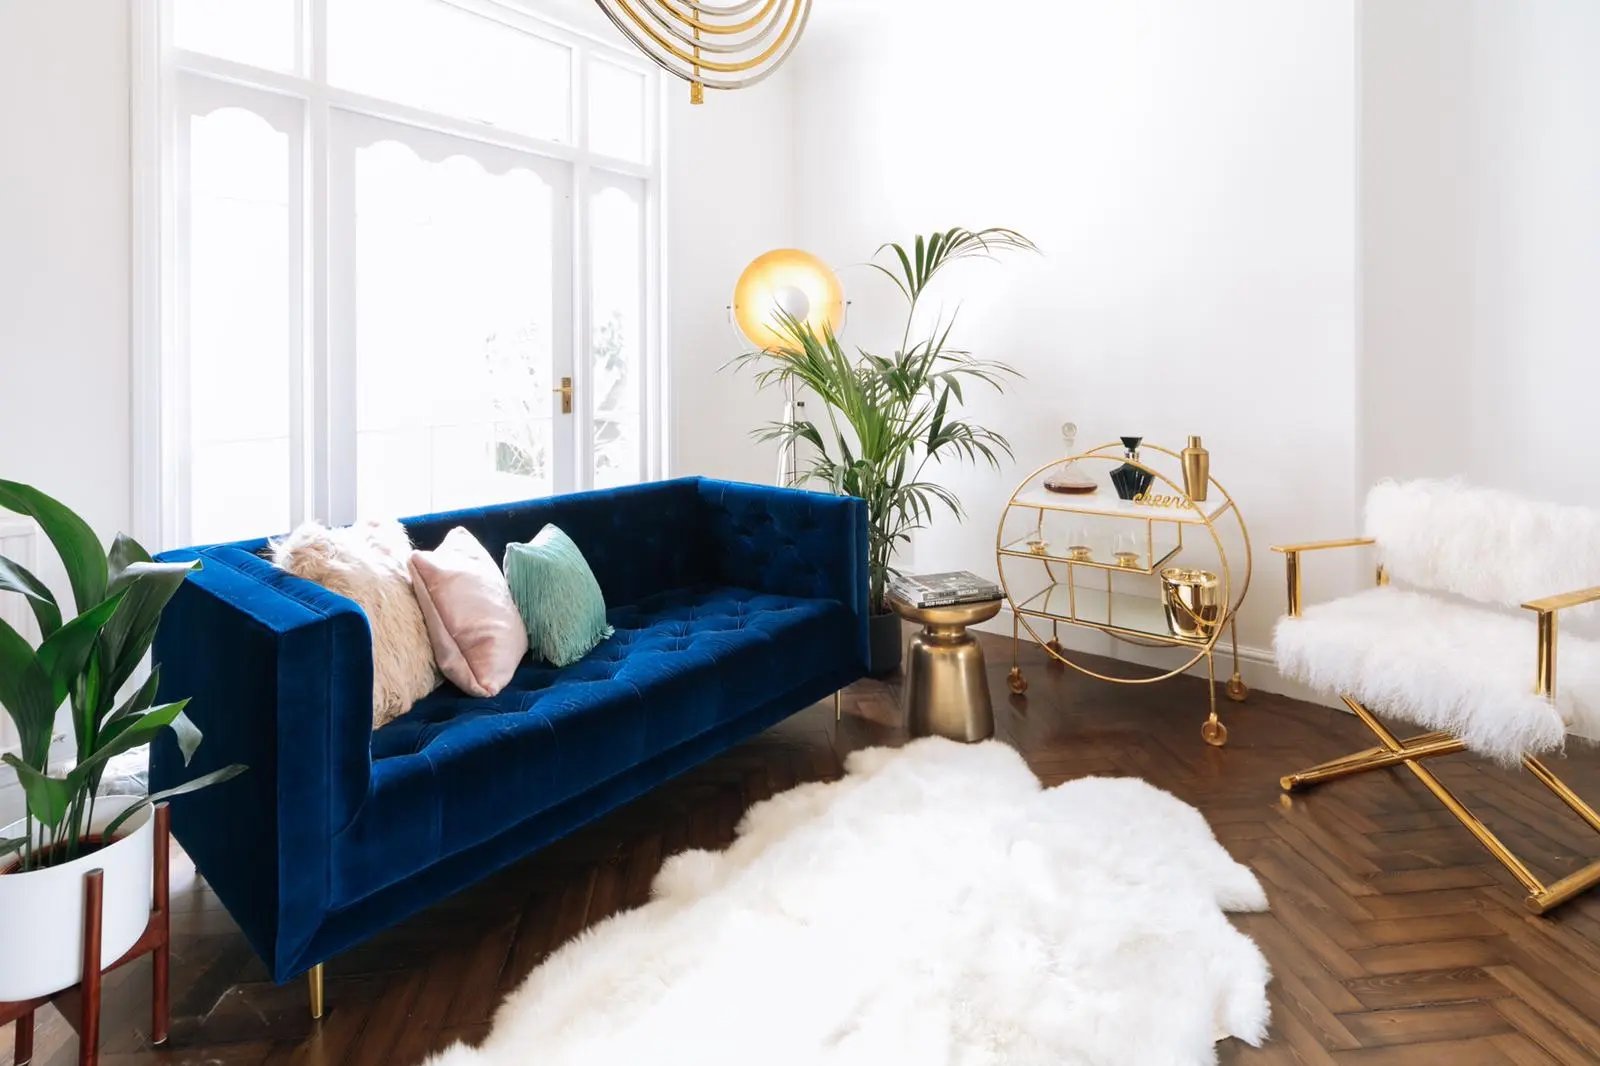 Bright white living room with blue and gold accents